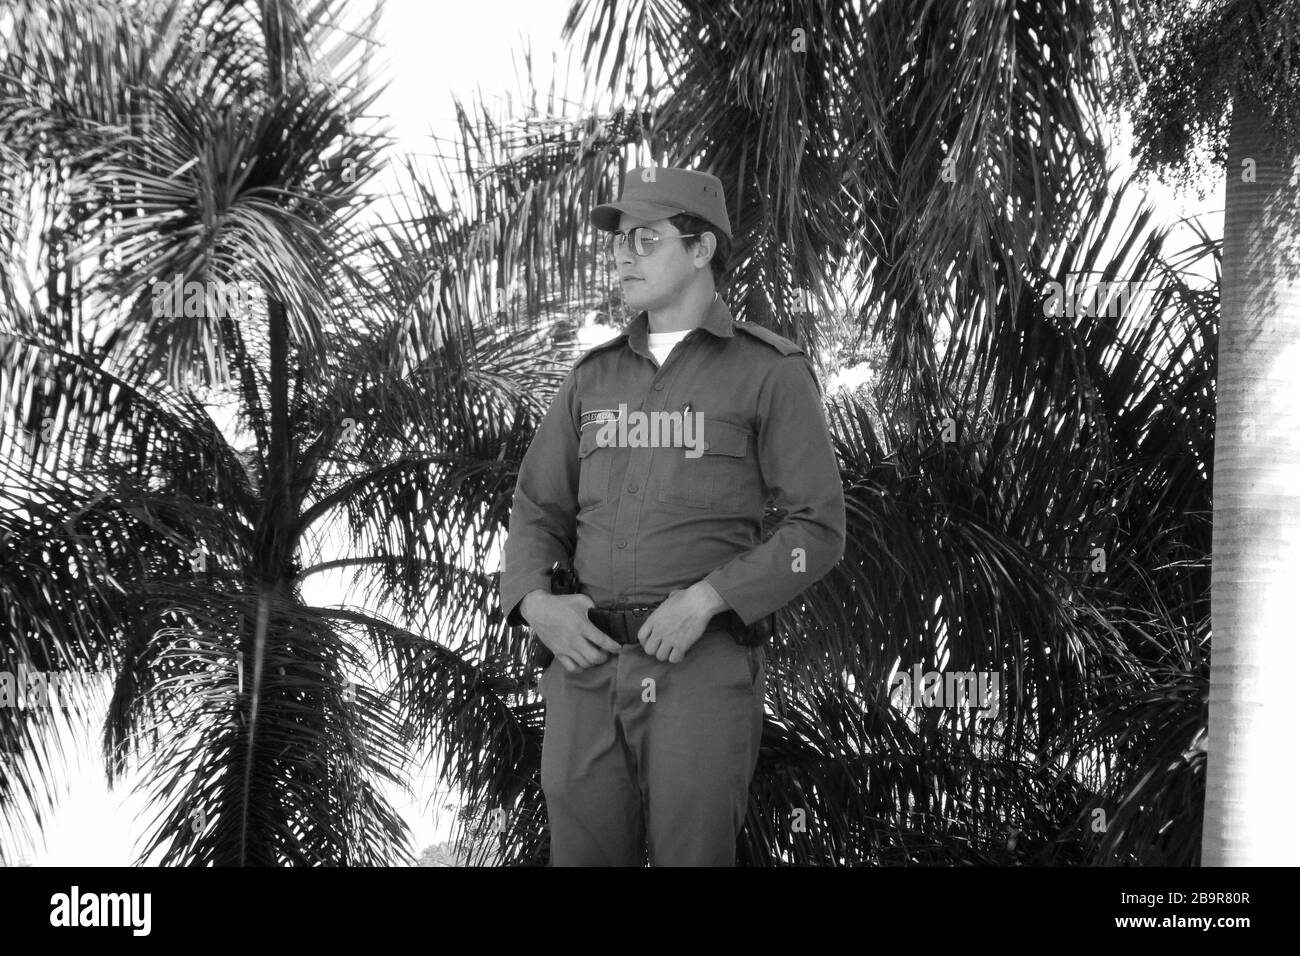 smart military Soldier on guard with sun glasses in Cuba with palm trees in rear military army hat gun palm trees tree palms watch watching Stock Photo